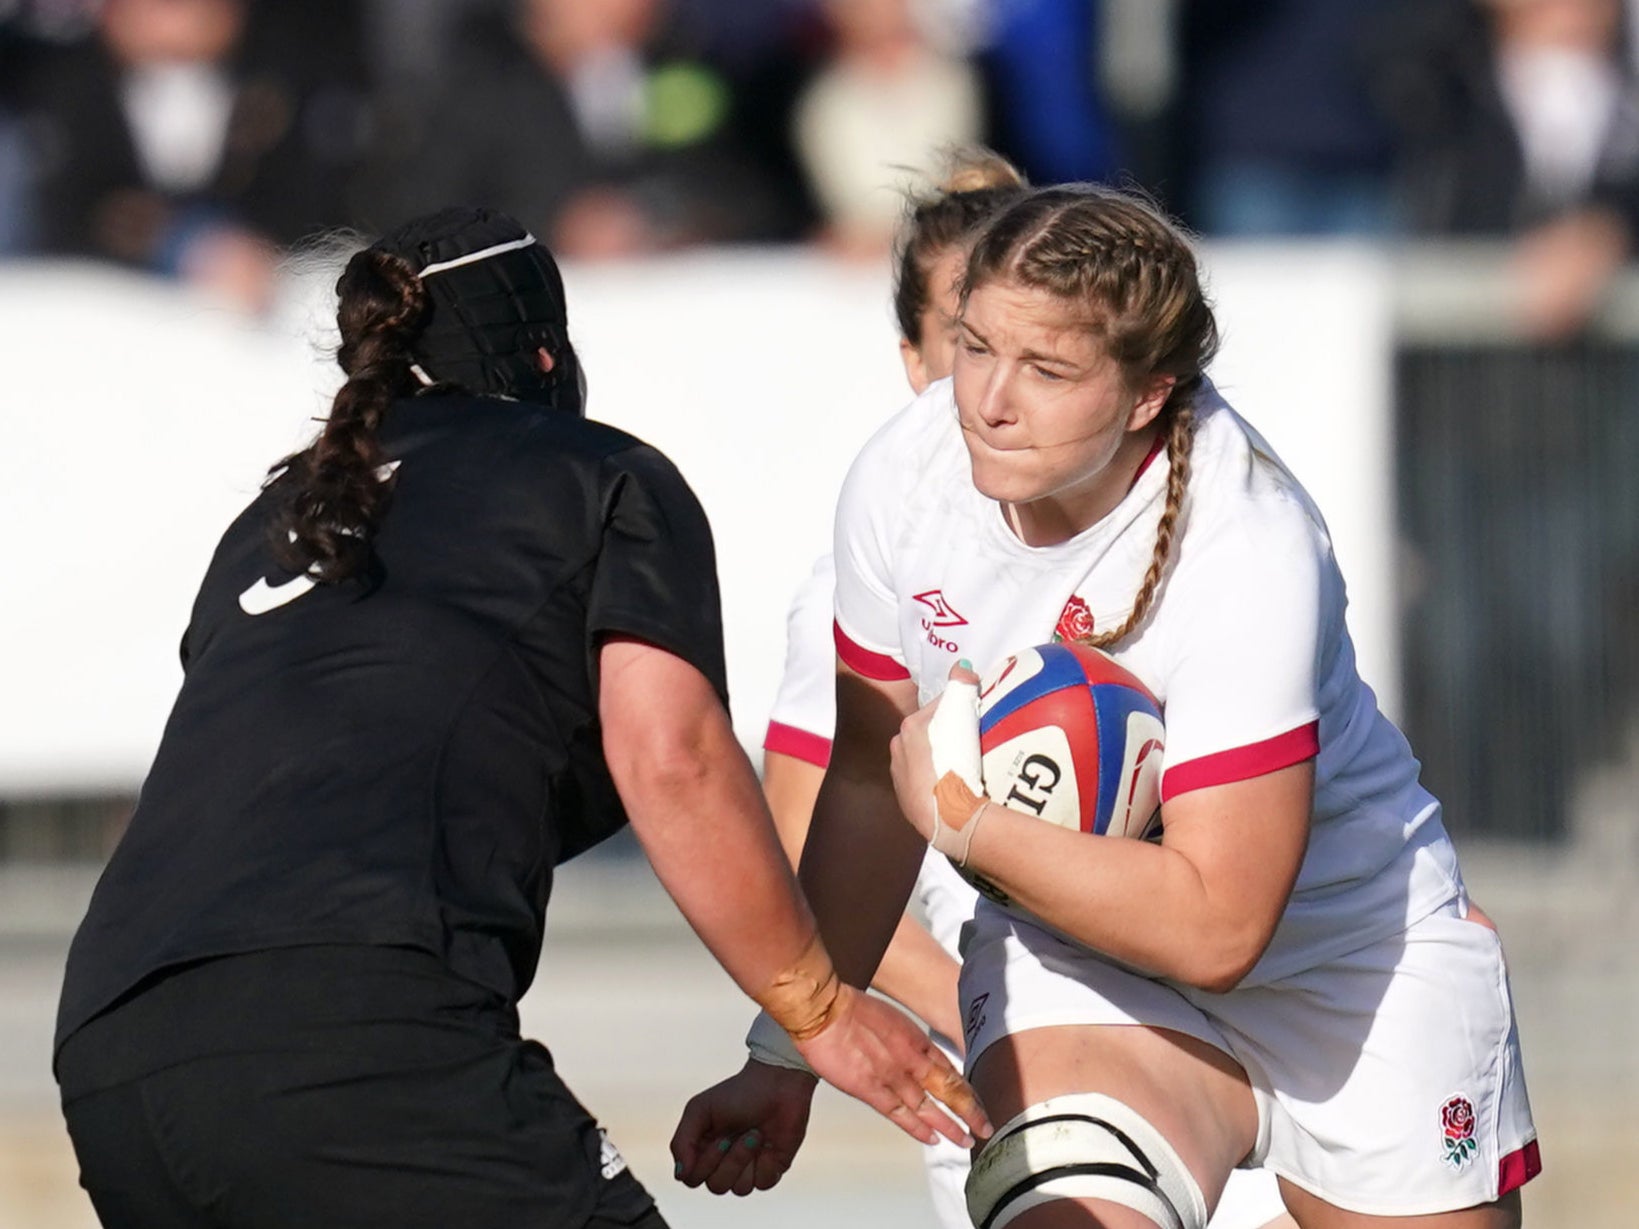 Poppy Cleall captained England for the first time in the Autumn Internationals